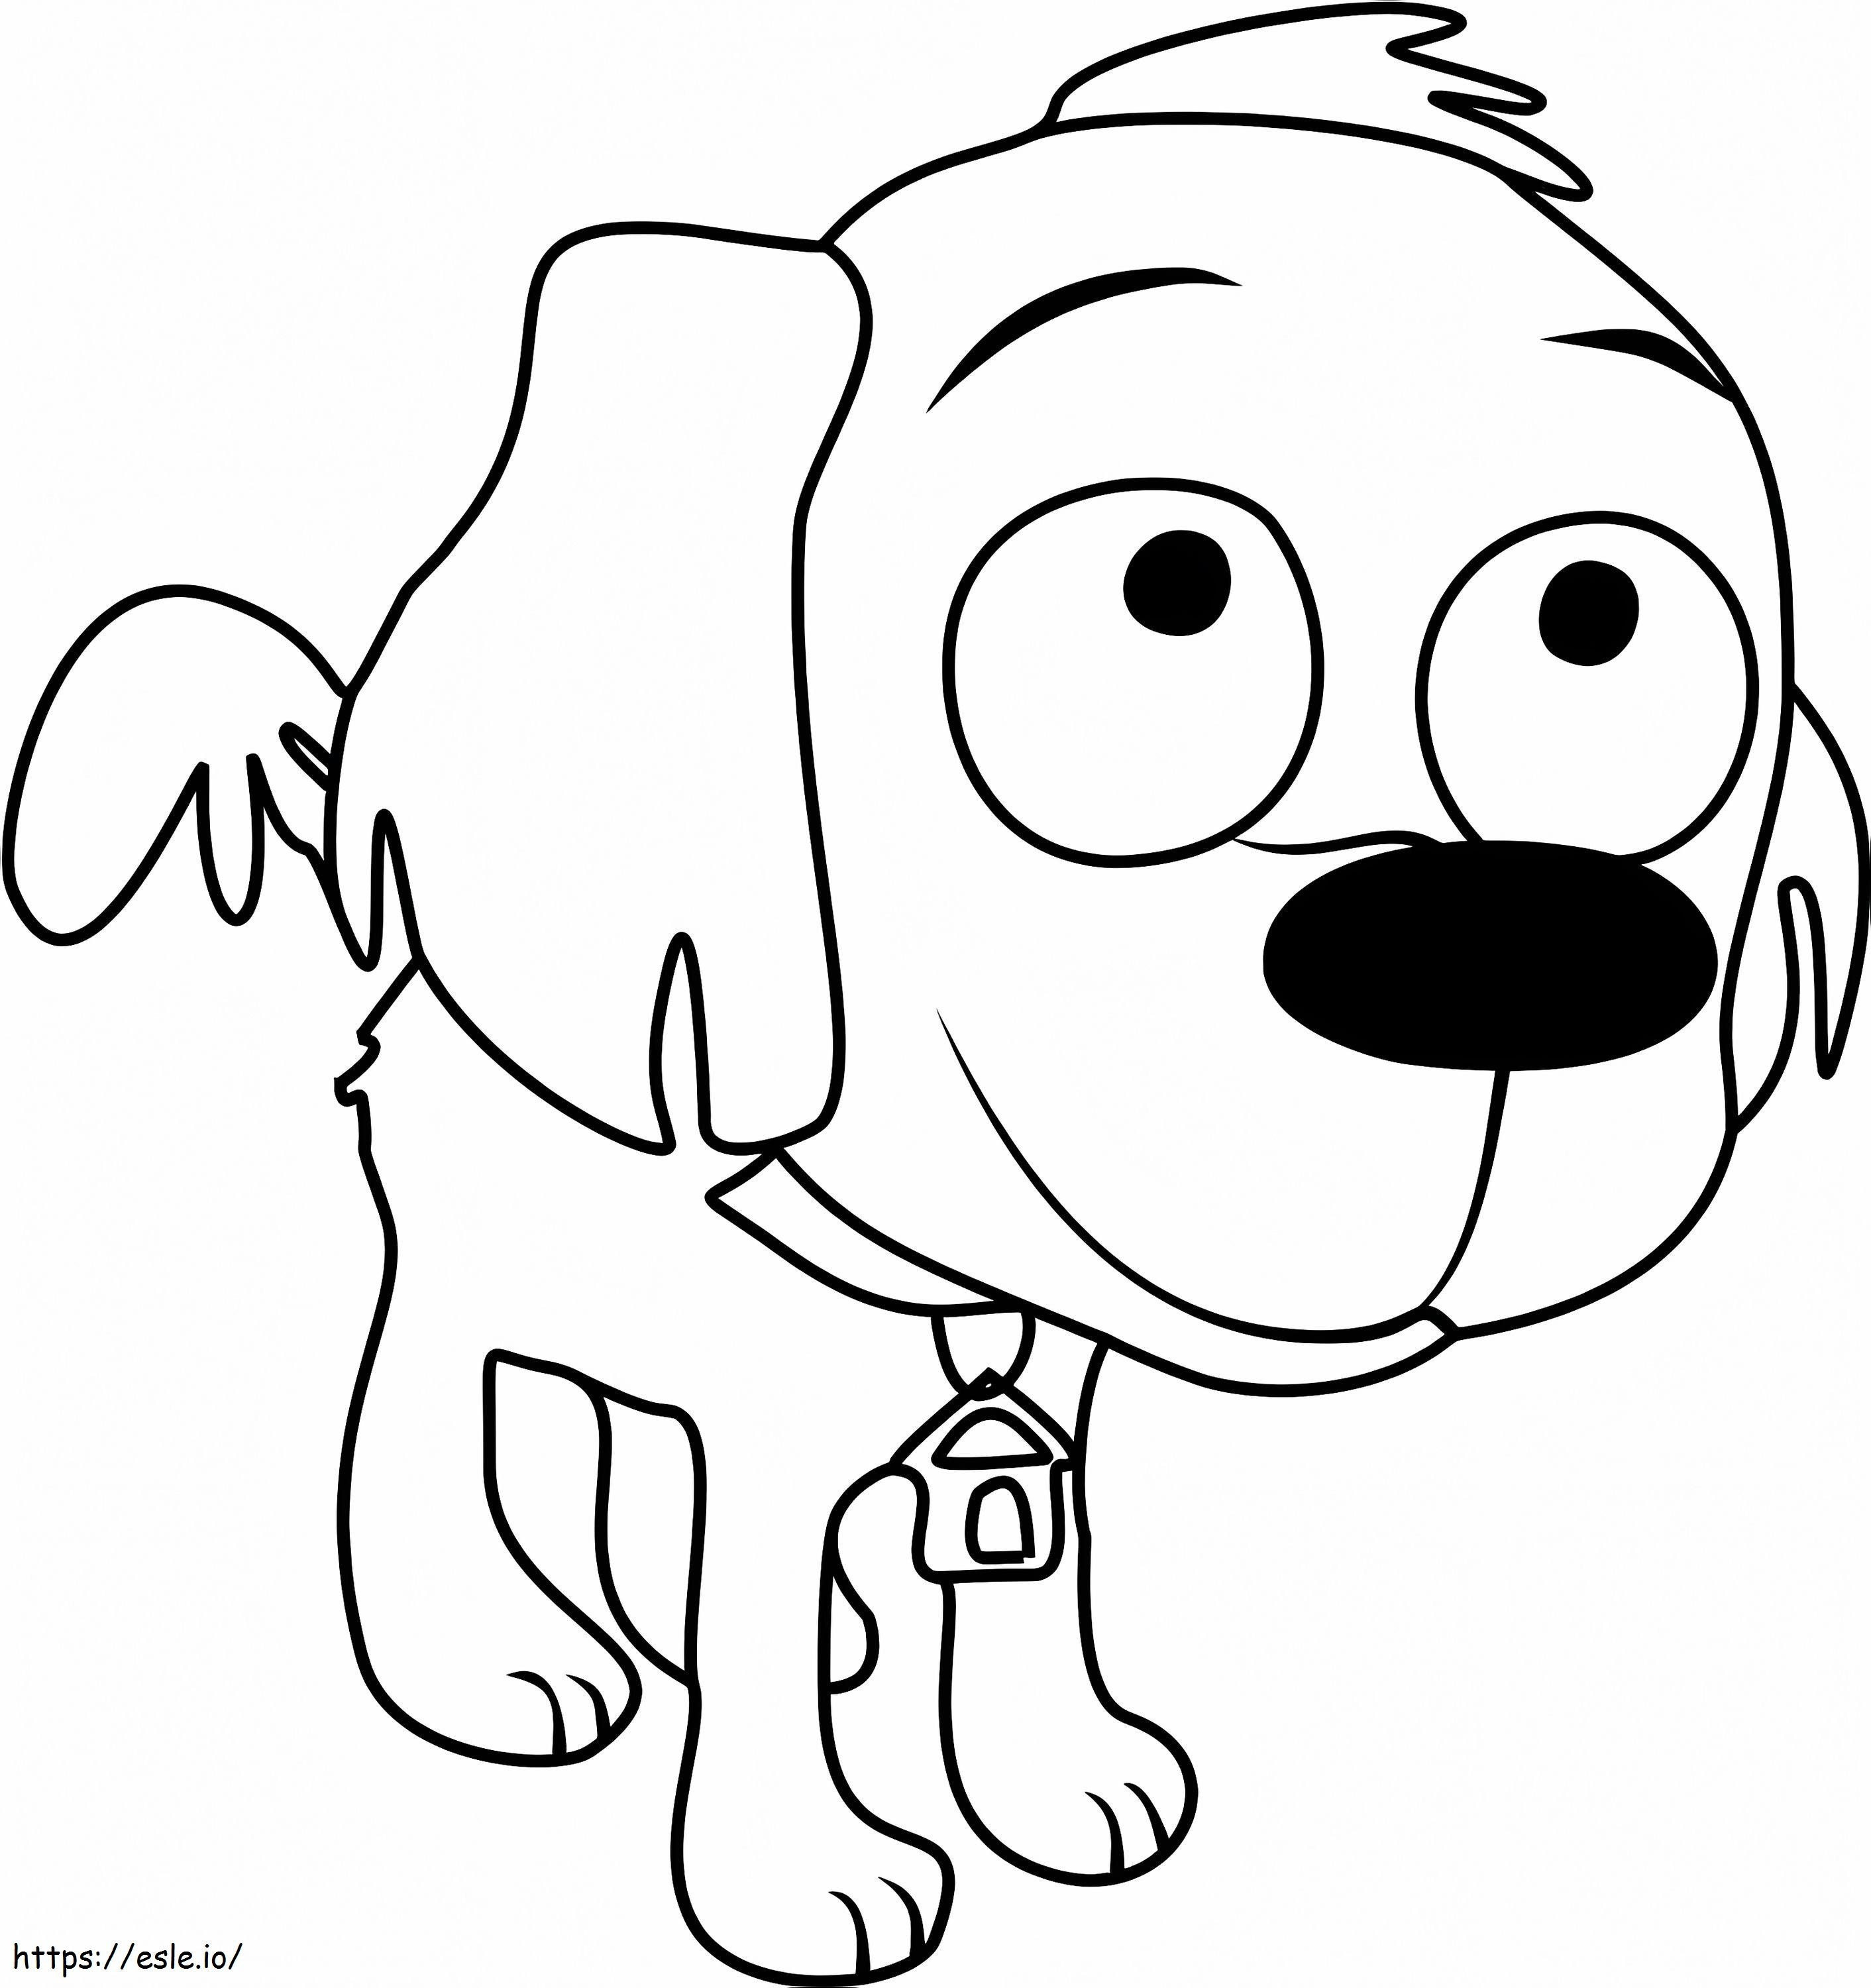 McGuffin From Pound Puppies coloring page